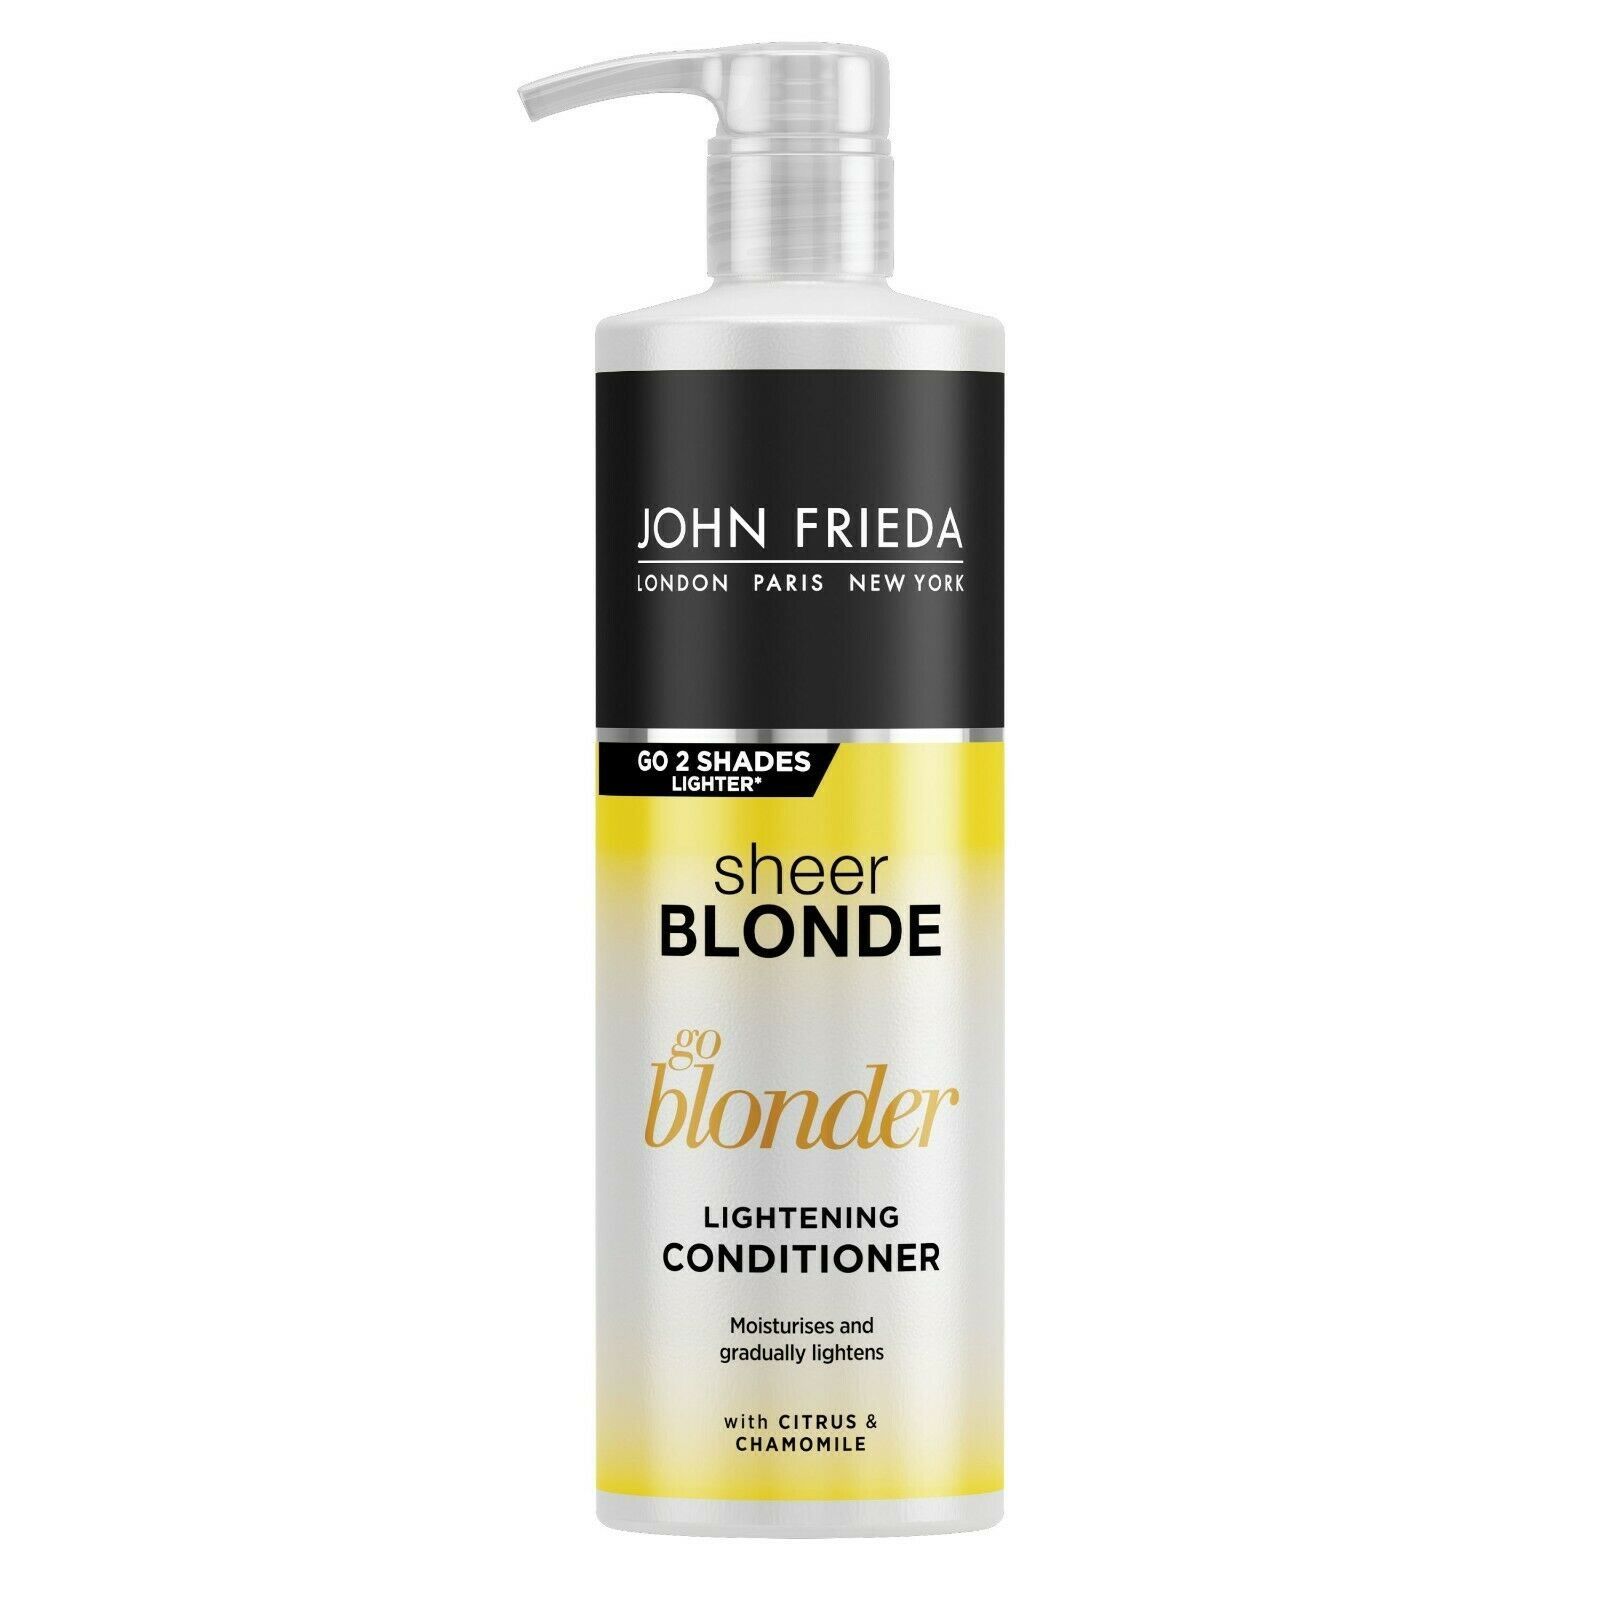 John Frieda Sheer Blonde Go Blonder Lightening Shampoo & Conditioner Duo Pack.  Get a lighter blonde that feels as good as it looks. Our Lightening Shampoo gradually lightens and renews blonde hair's healthy appearance and touch. The Lightening Conditioner, with Citrus and Chamomile, restores moisture and renews softness, giving you a shimmery, sunlit blonde.  

Set Contains:  1x John Frieda Sheer Blonde Go Blonder Lightening Shampoo 500ml & 1x John Frieda Sheer Blonde Go Blonder Lightening Conditioner 500ml